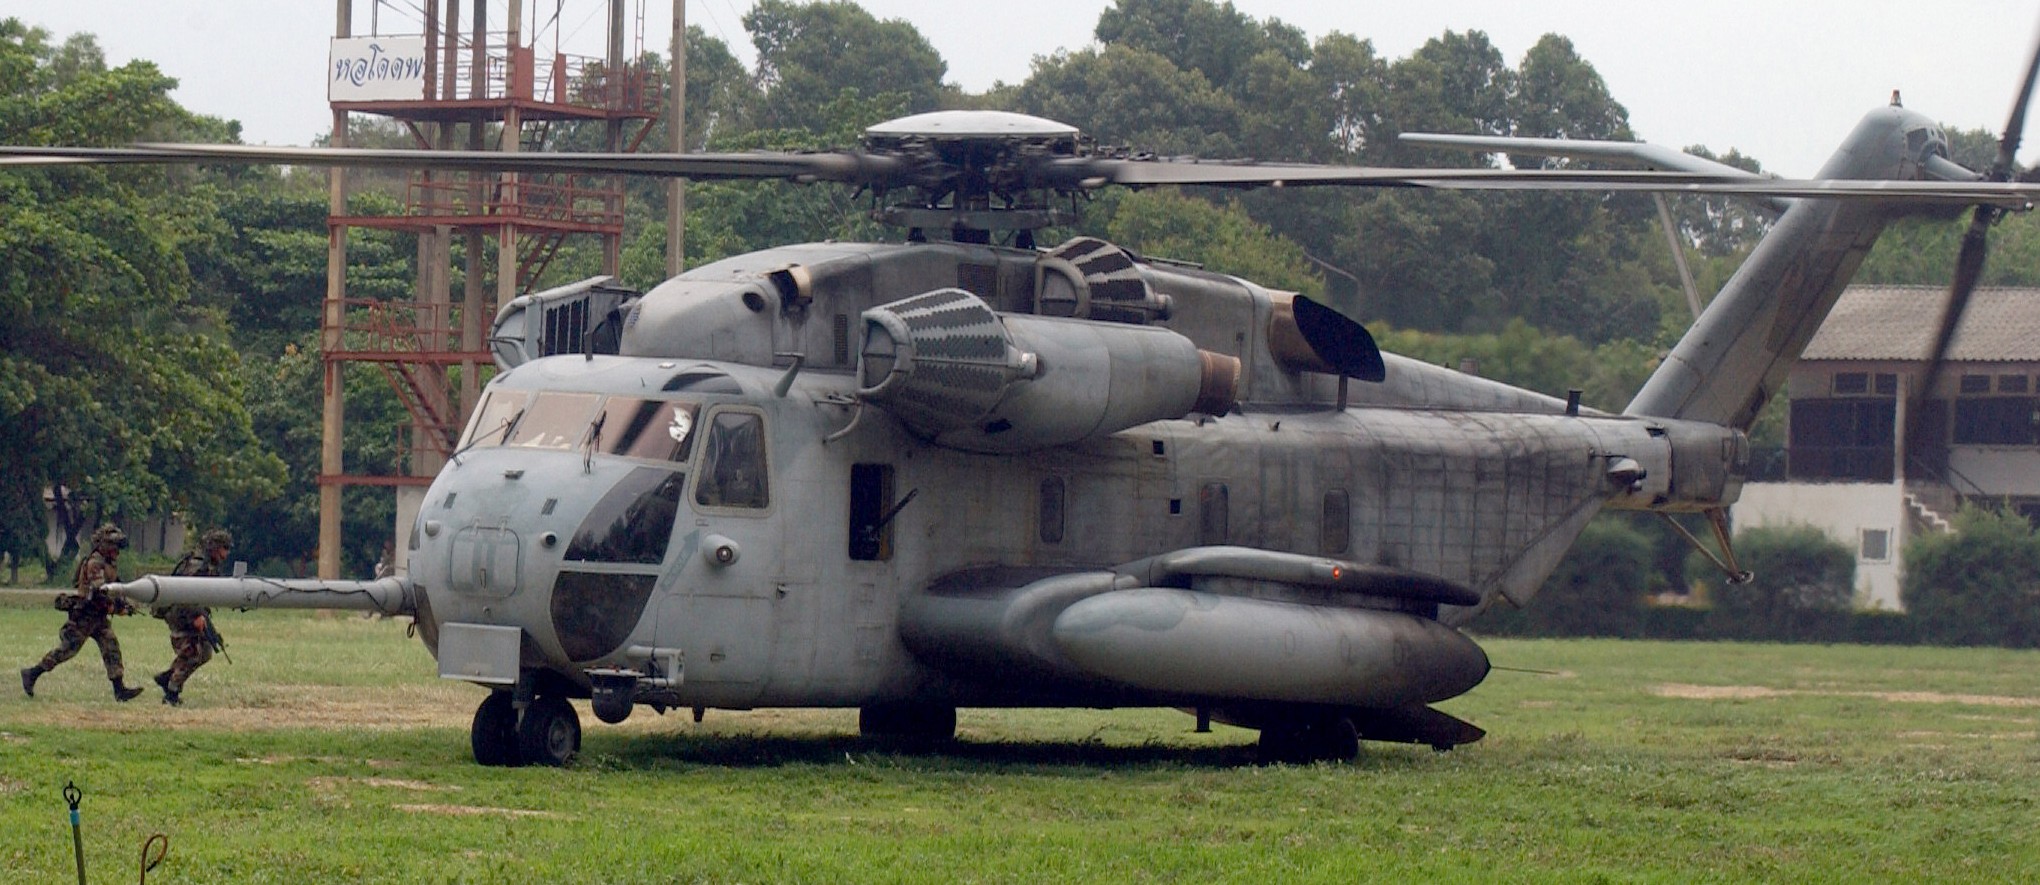 hmh-363 red lions marine heavy helicopter squadron usmc sikorsky ch-53d sea stallion 20